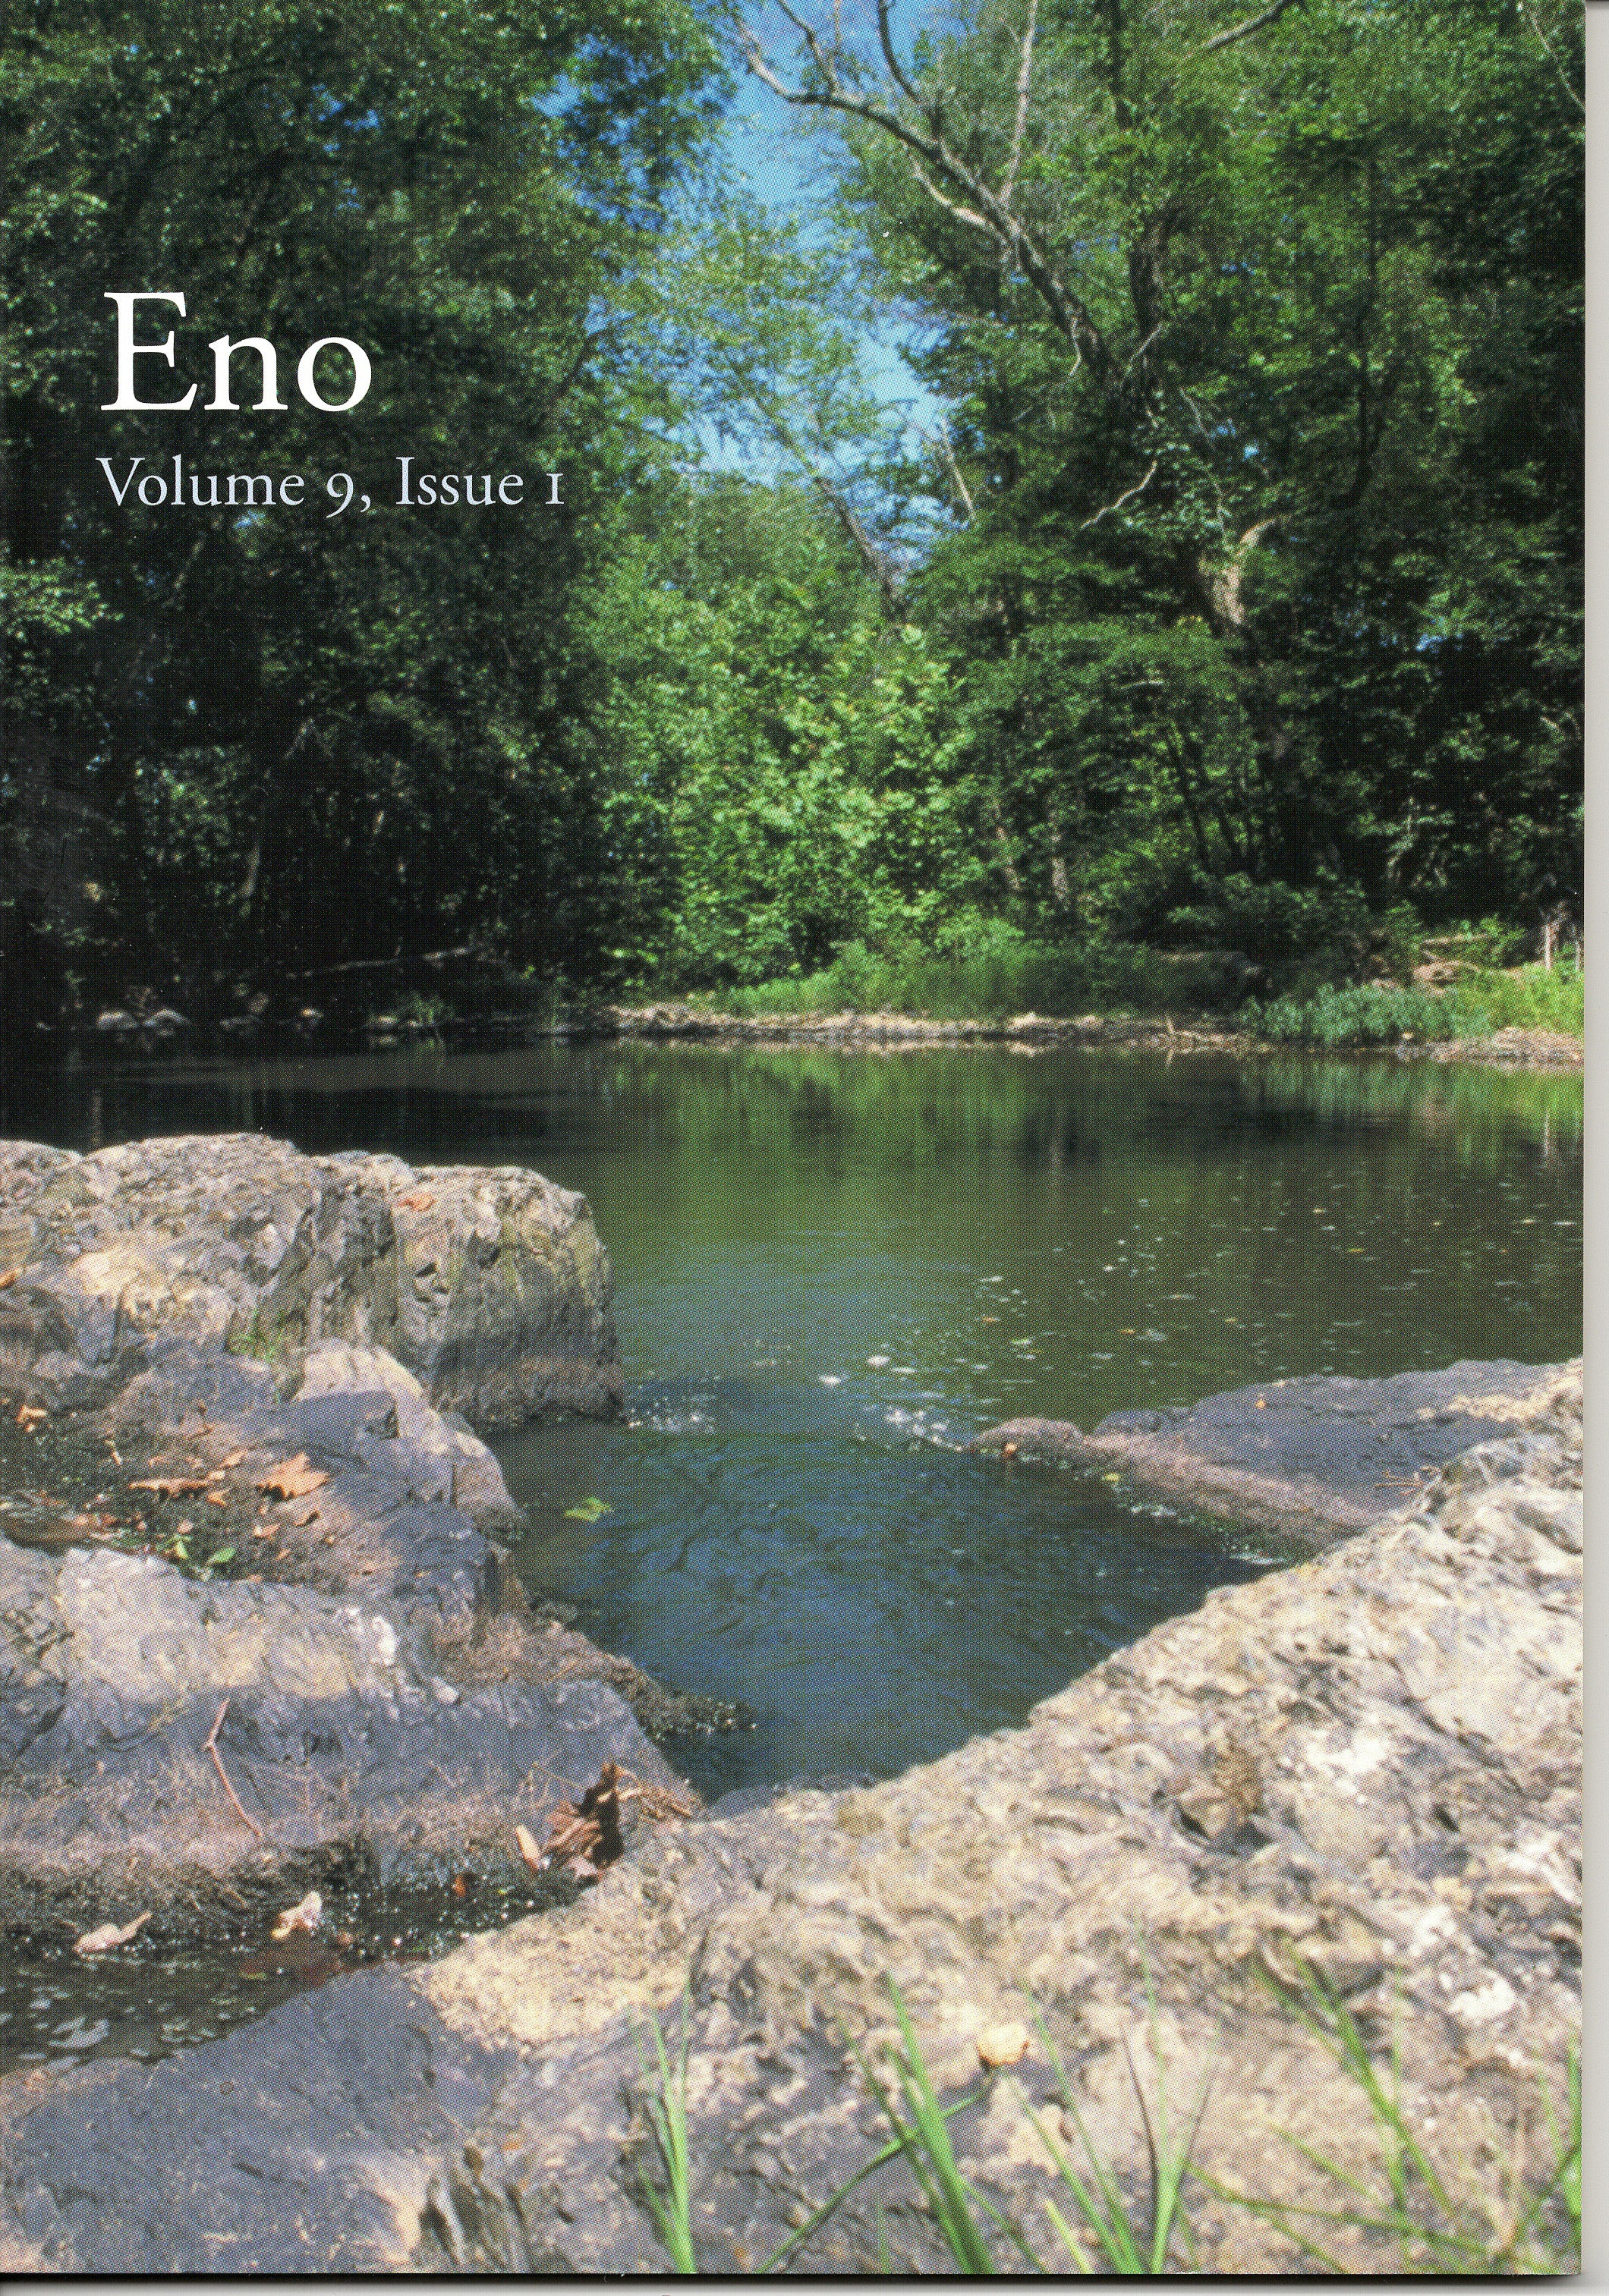 Eno Journal, Vol. 9, No. 1 - The Little River Issue